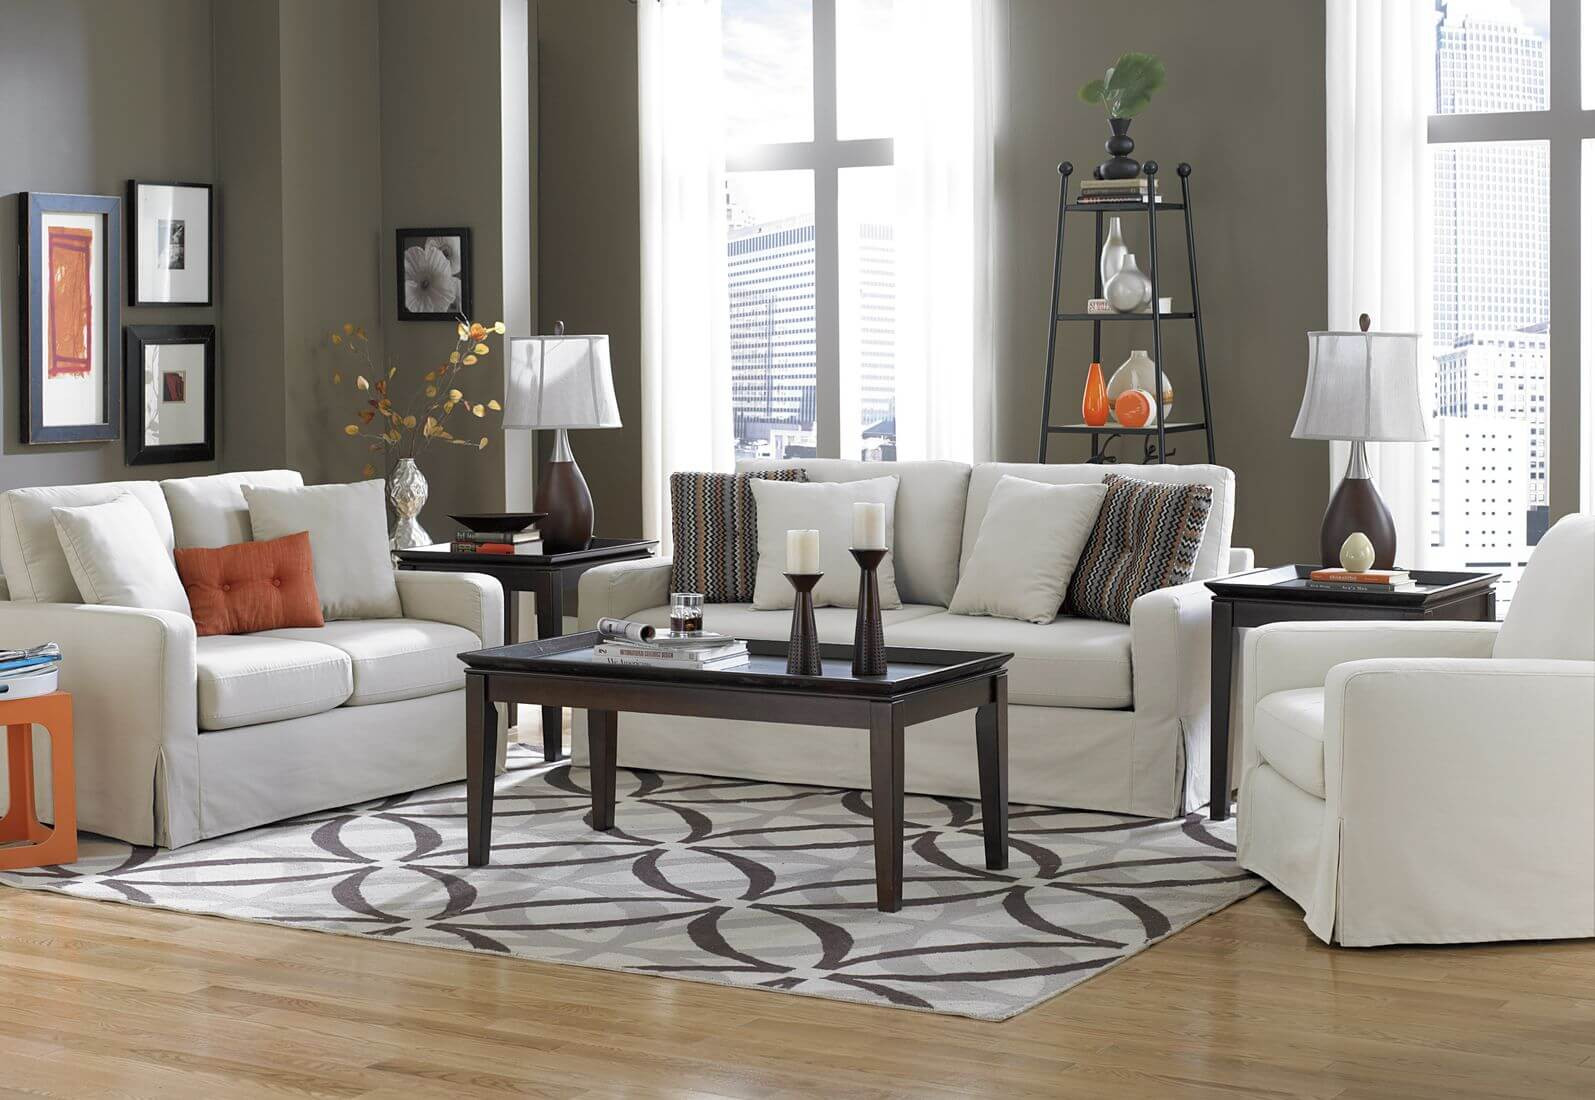 Throw Rugs For Living Room
 40 Living Rooms with Area Rugs for Warmth & Richness